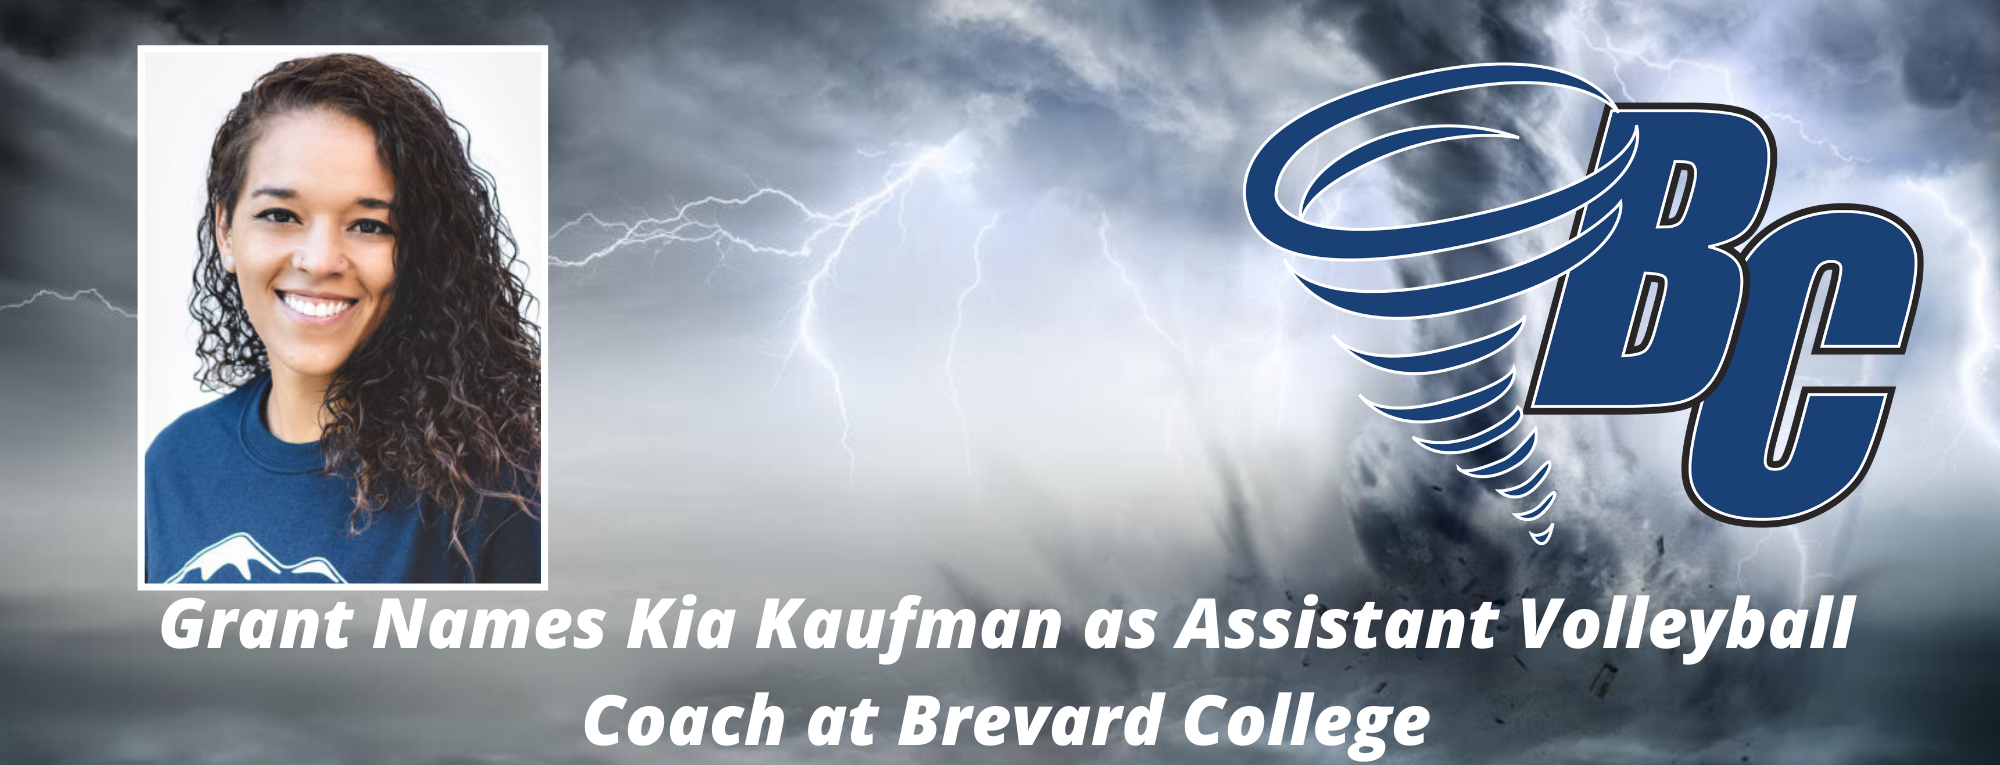 Grant Names Kia Kaufman as Assistant Volleyball Coach at Brevard College